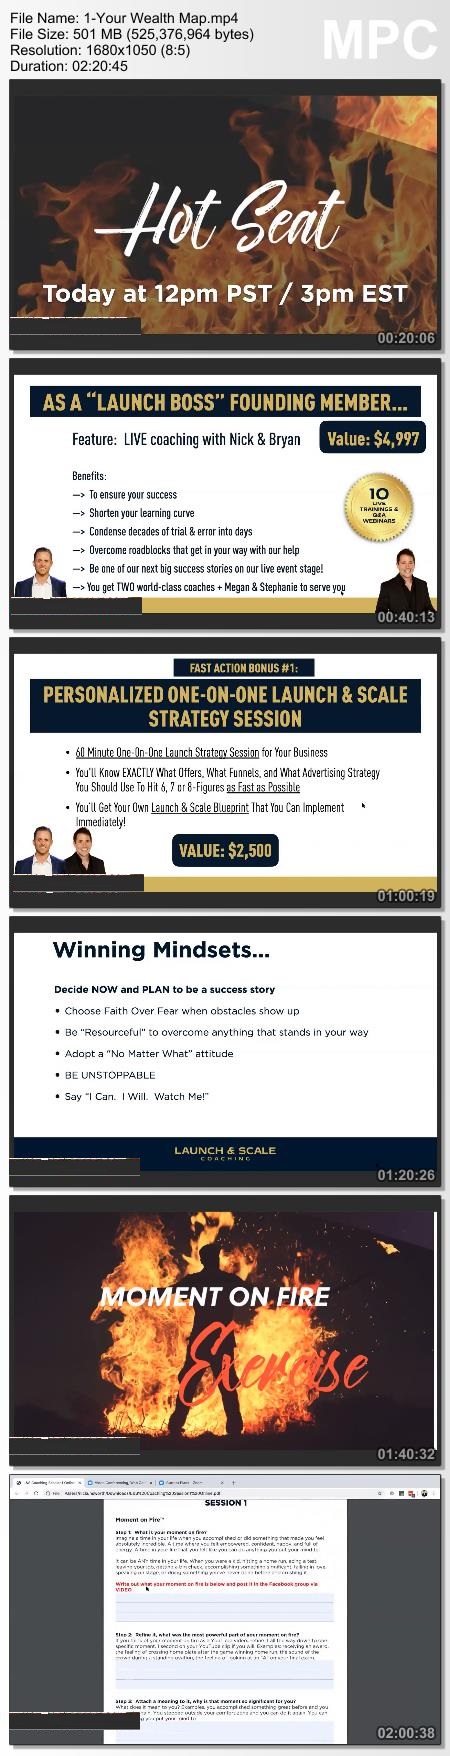 Bryan Dulaney and Nick Unsworth - The Launch & Scale Coaching